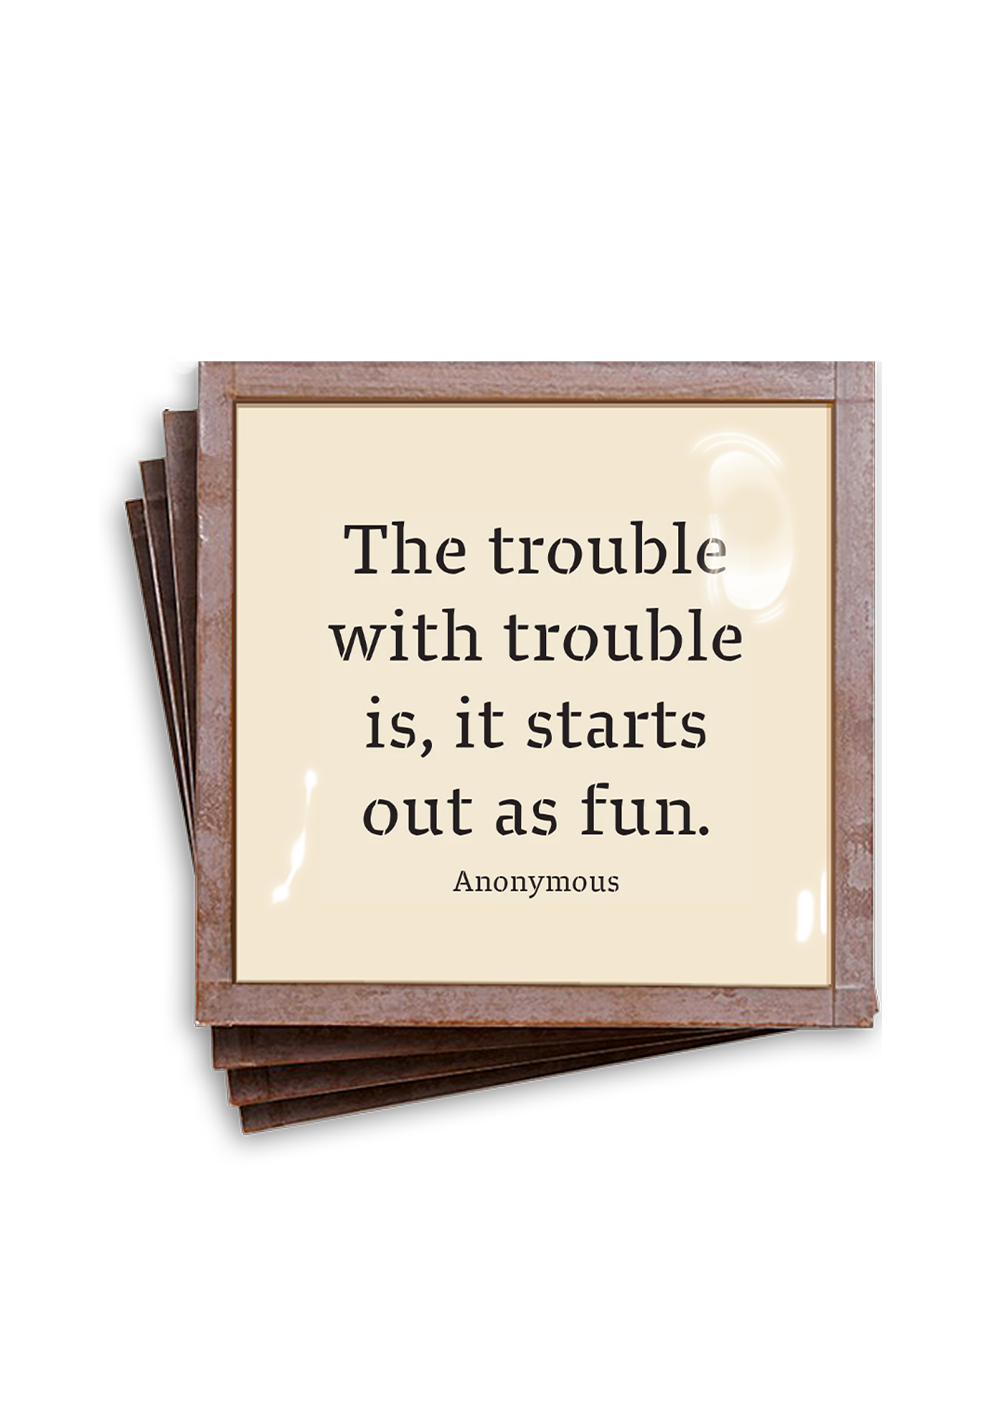 Bensgarden.com | The Trouble With Trouble Copper & Glass Coasters, Set of 4 - Ben's Garden. Made in New York City.